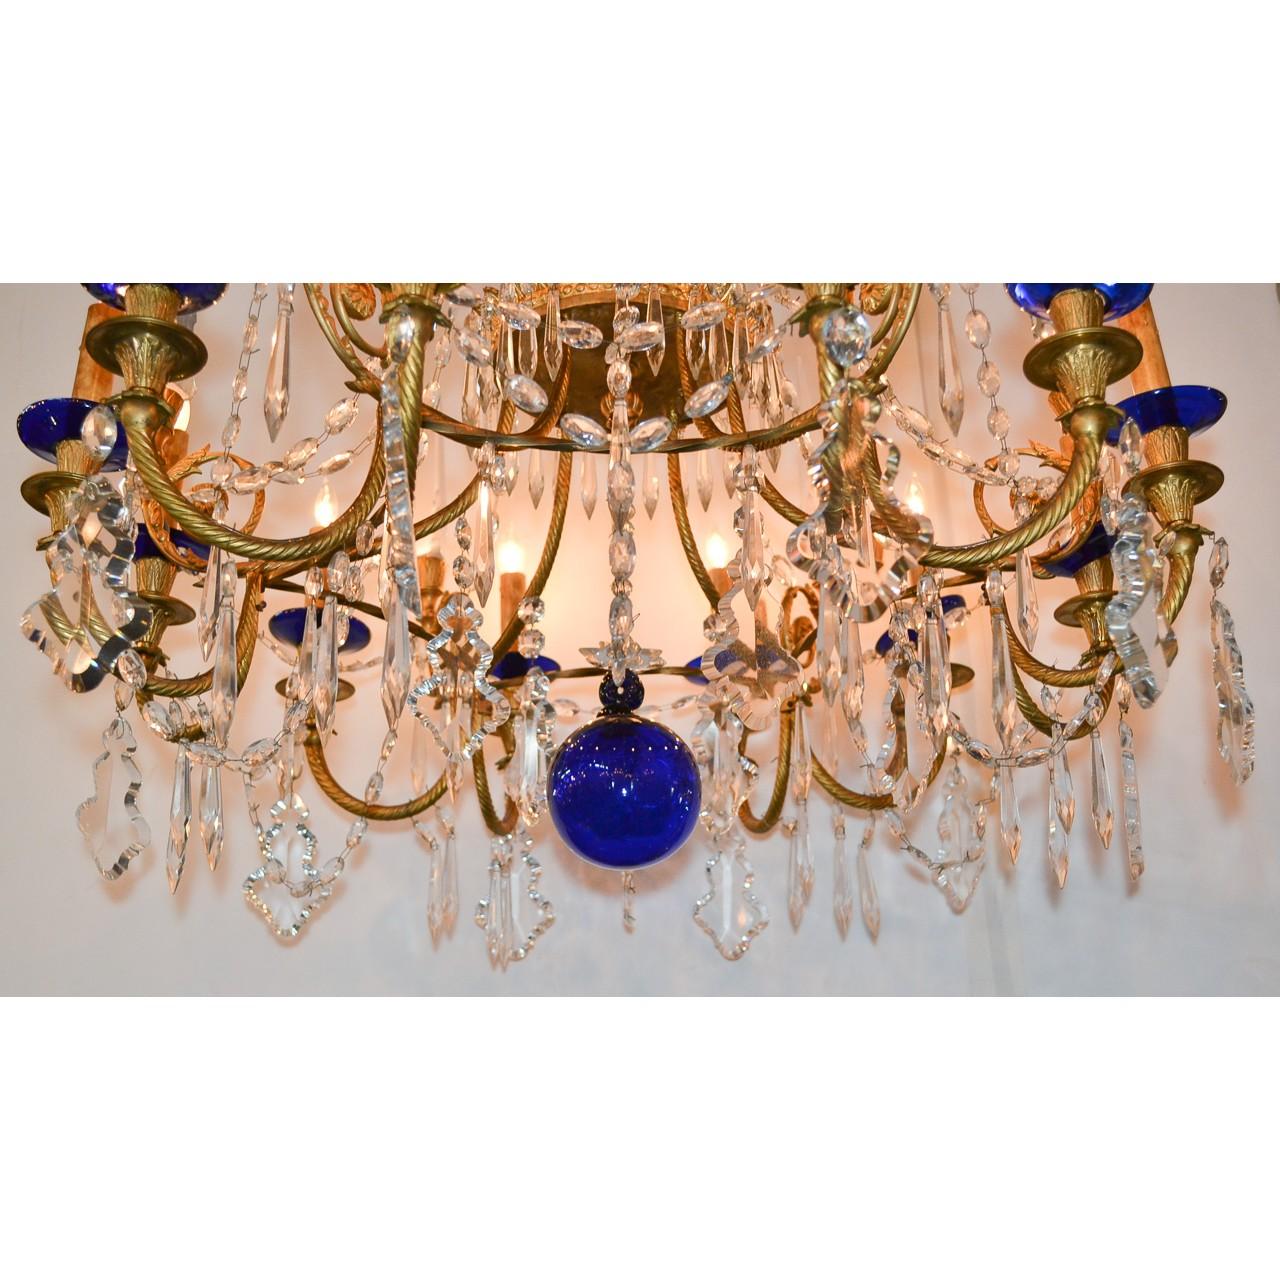 Rare and very fine pair of 19th century Russian chandeliers of gold-gilded bronze, cut crystal, and cobalt blue glass. The bronze leaf scroll and rosette crown adorned with faceted bead, diamond, and spear cut crystals. The stem with gorgeous cobalt